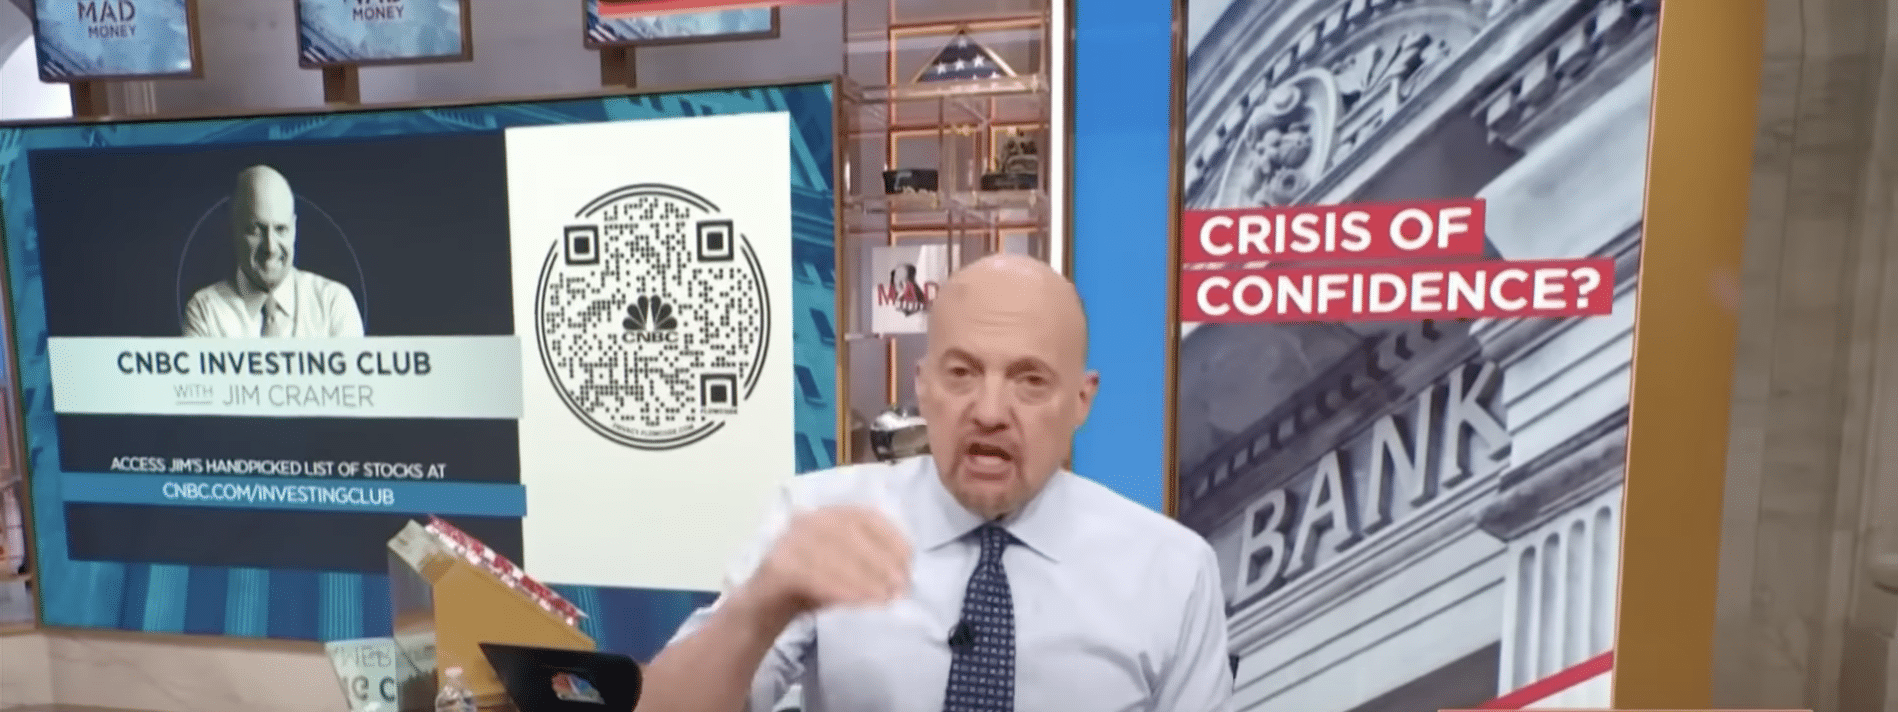 (WATCH) Jim Cramer warns the Feds may need to take “drastic measures” to stop bank crisis from spreading